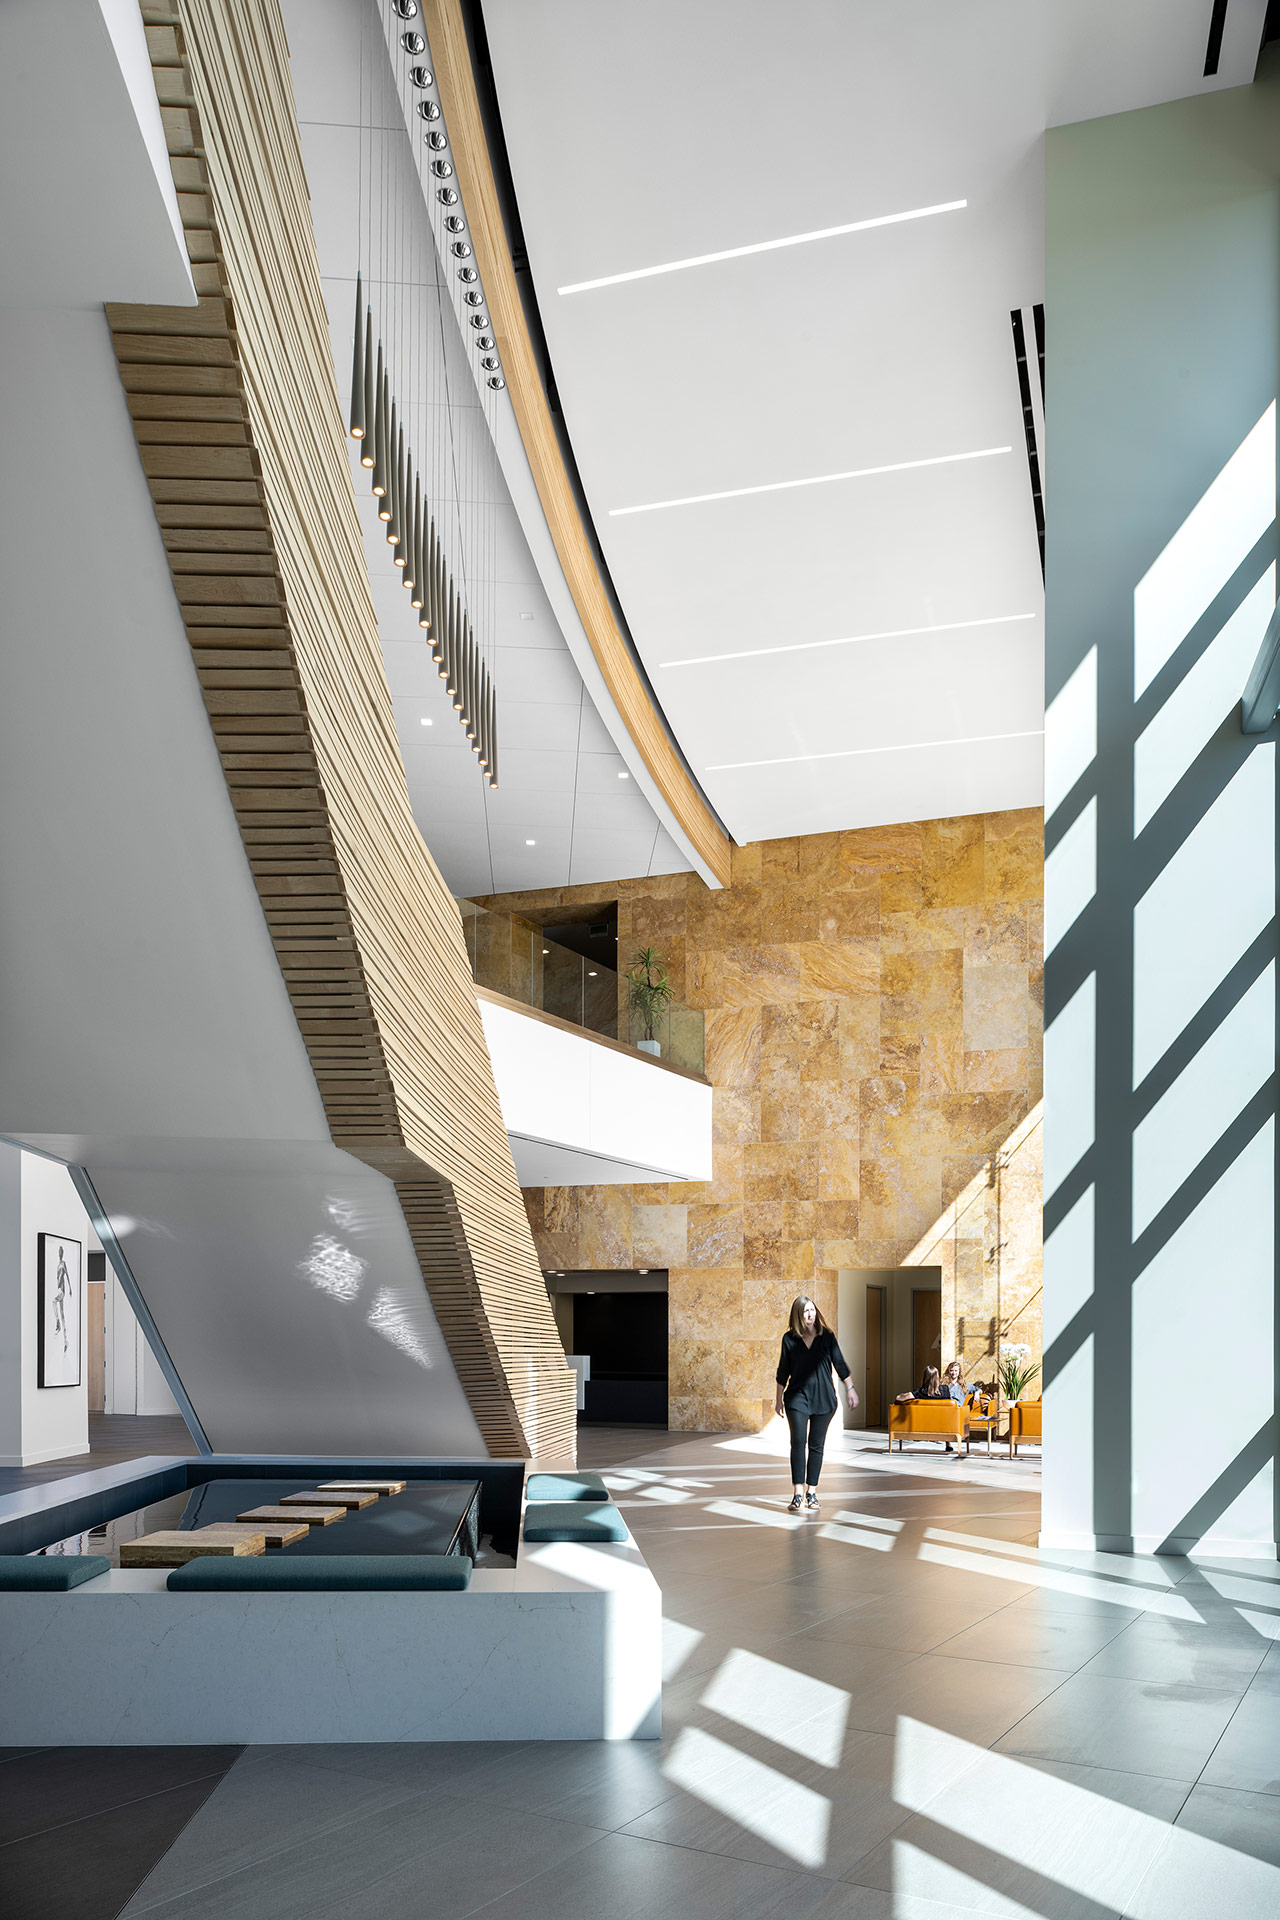 Interior at Ionis Conference Center lobby with view of water feature beneath the staircase